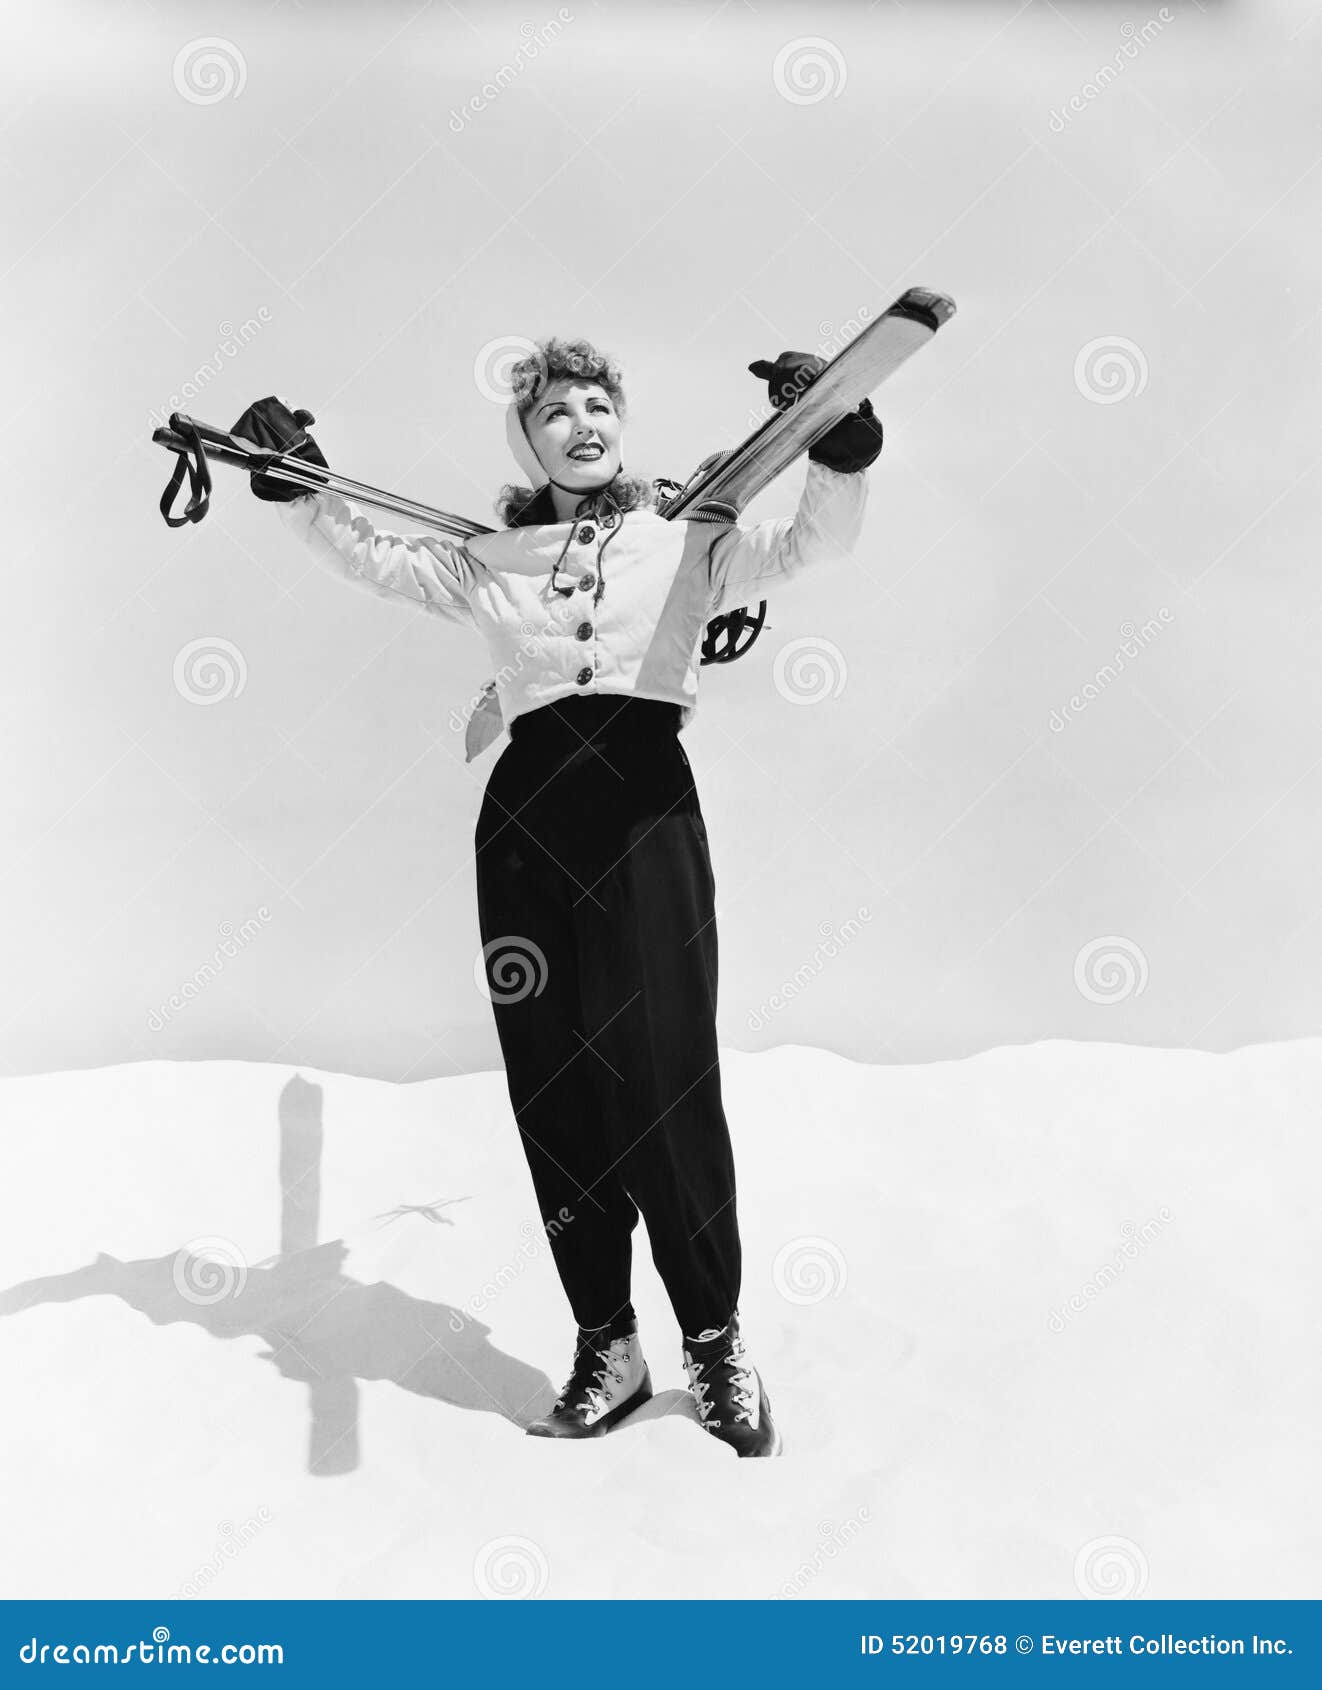 young woman carrying ski and ski pole on her shoulders